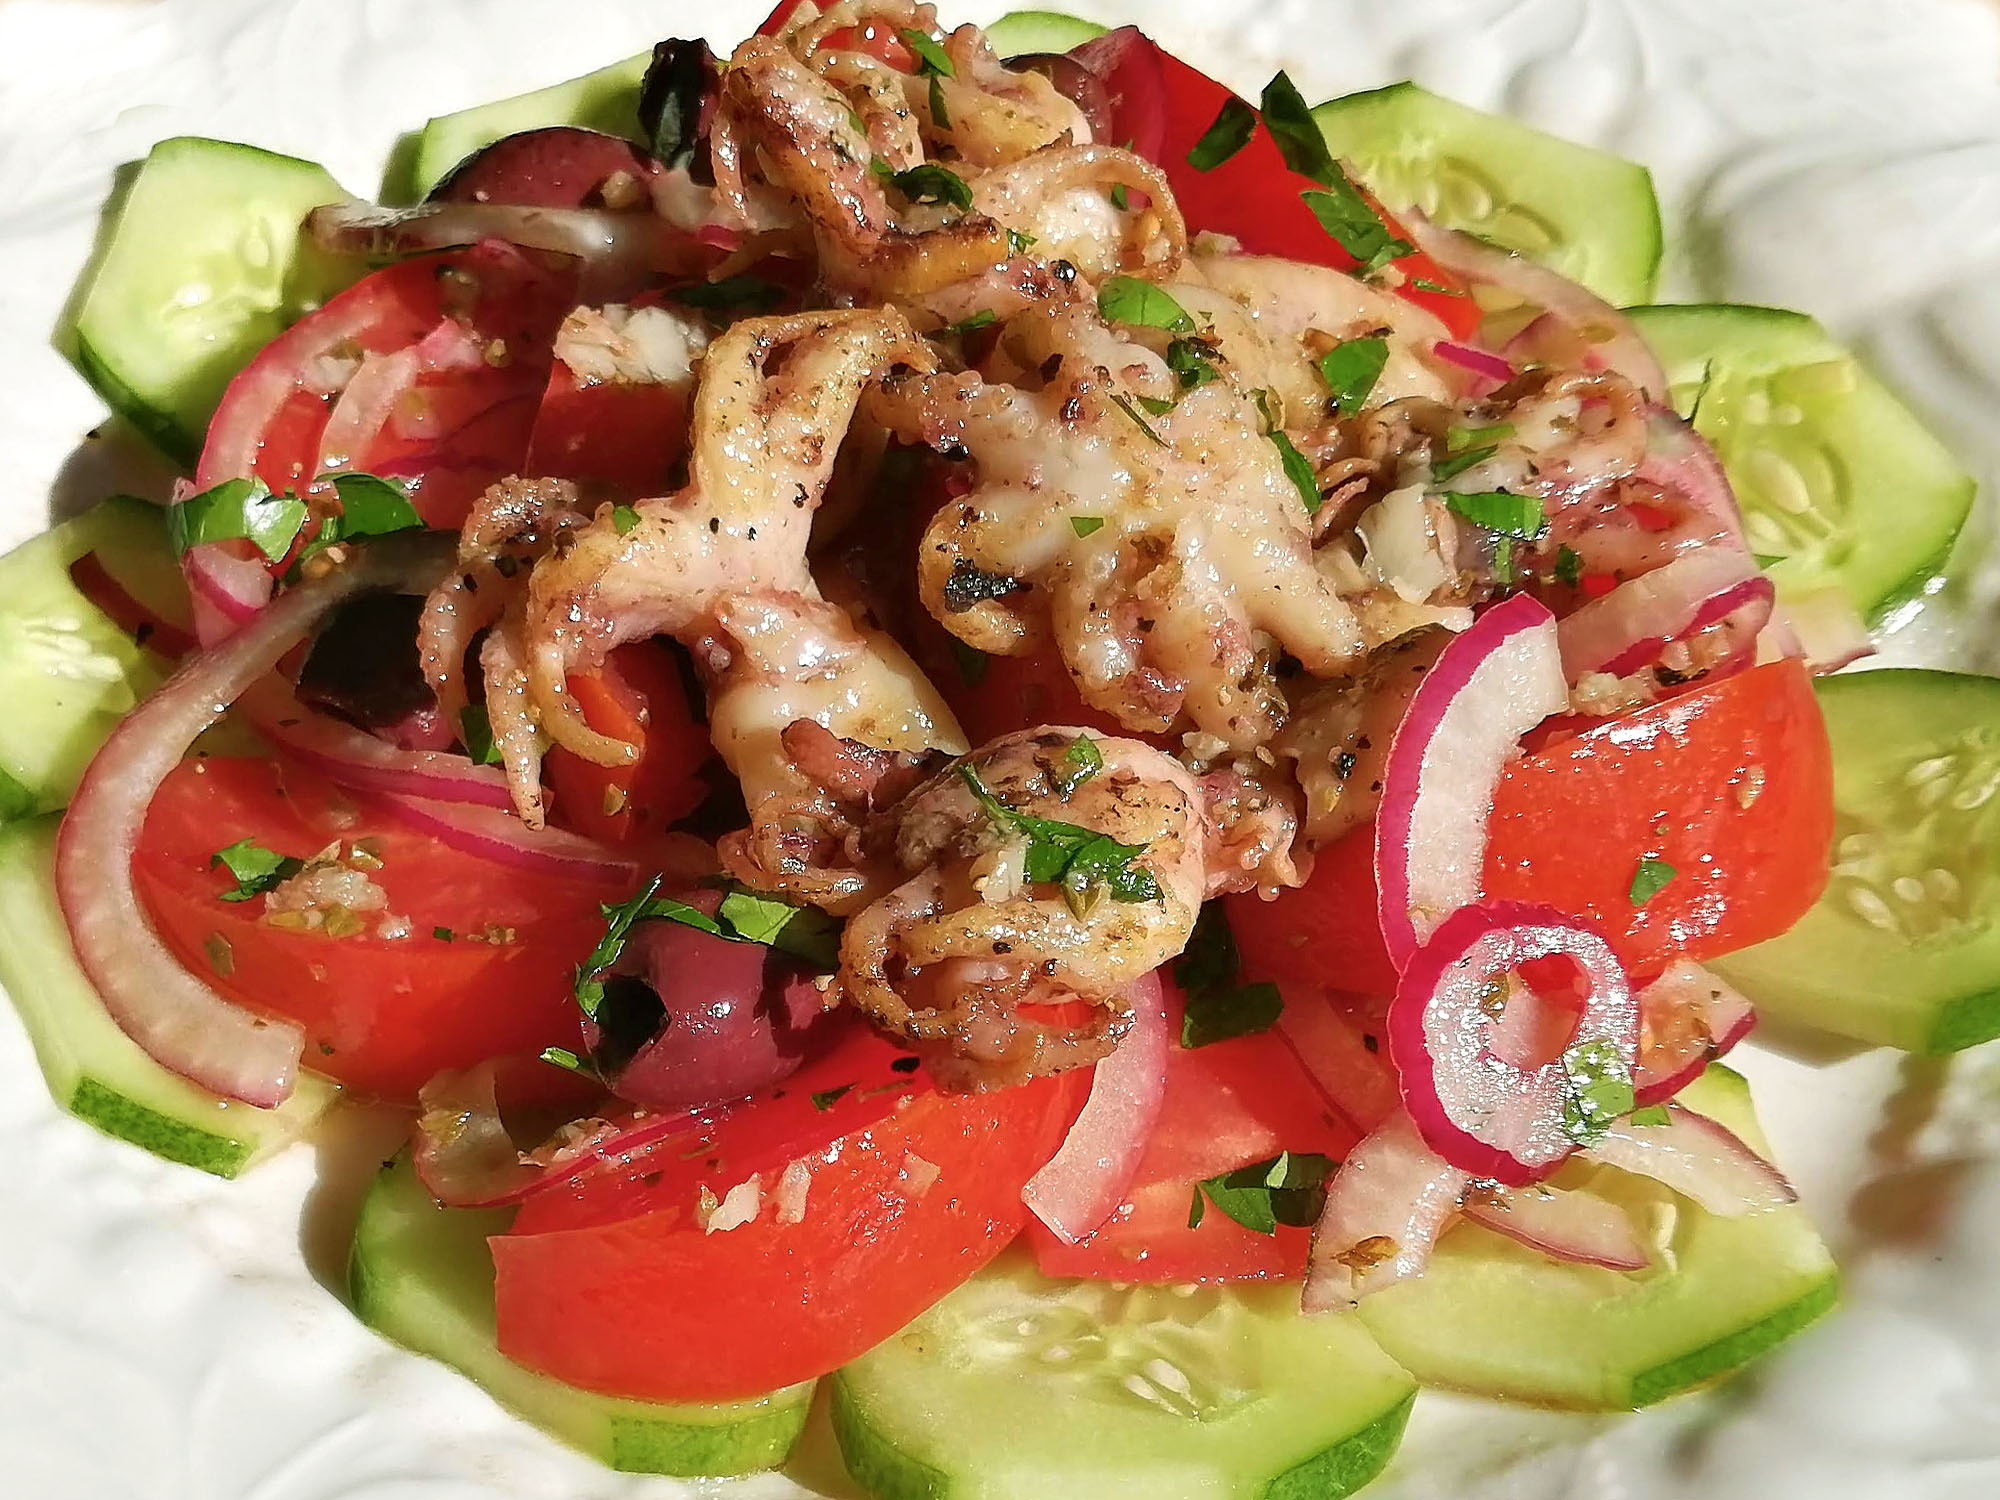 A white plate topped with dressed cucumbers, tomatoes, red onion, and olives; several grilled baby octopi are layered on top. Photo by Paul Young.